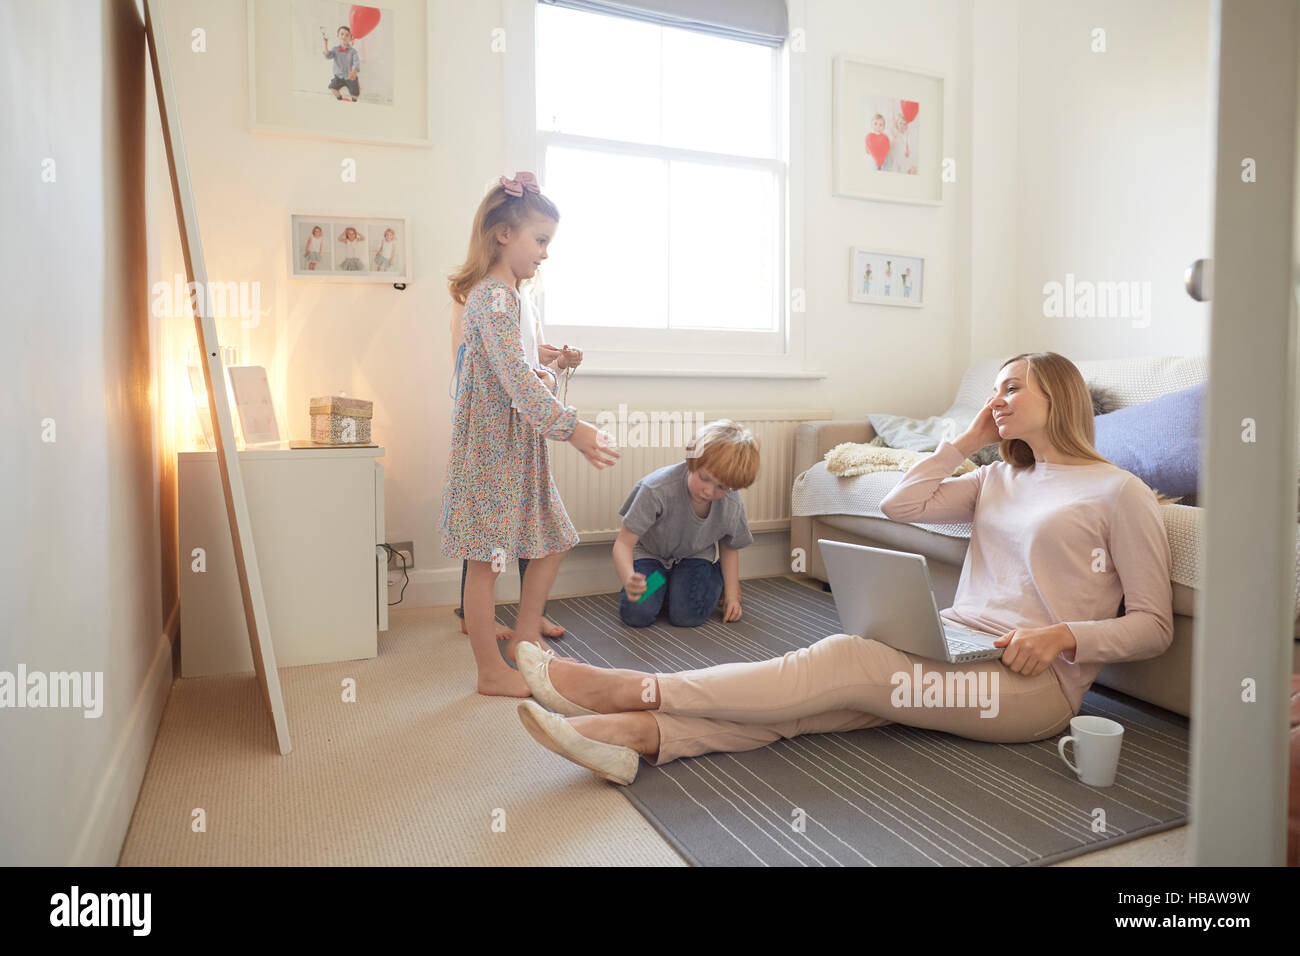 Mid adult woman sitting on living room floor with laptop whilst son and daughter play Stock Photo